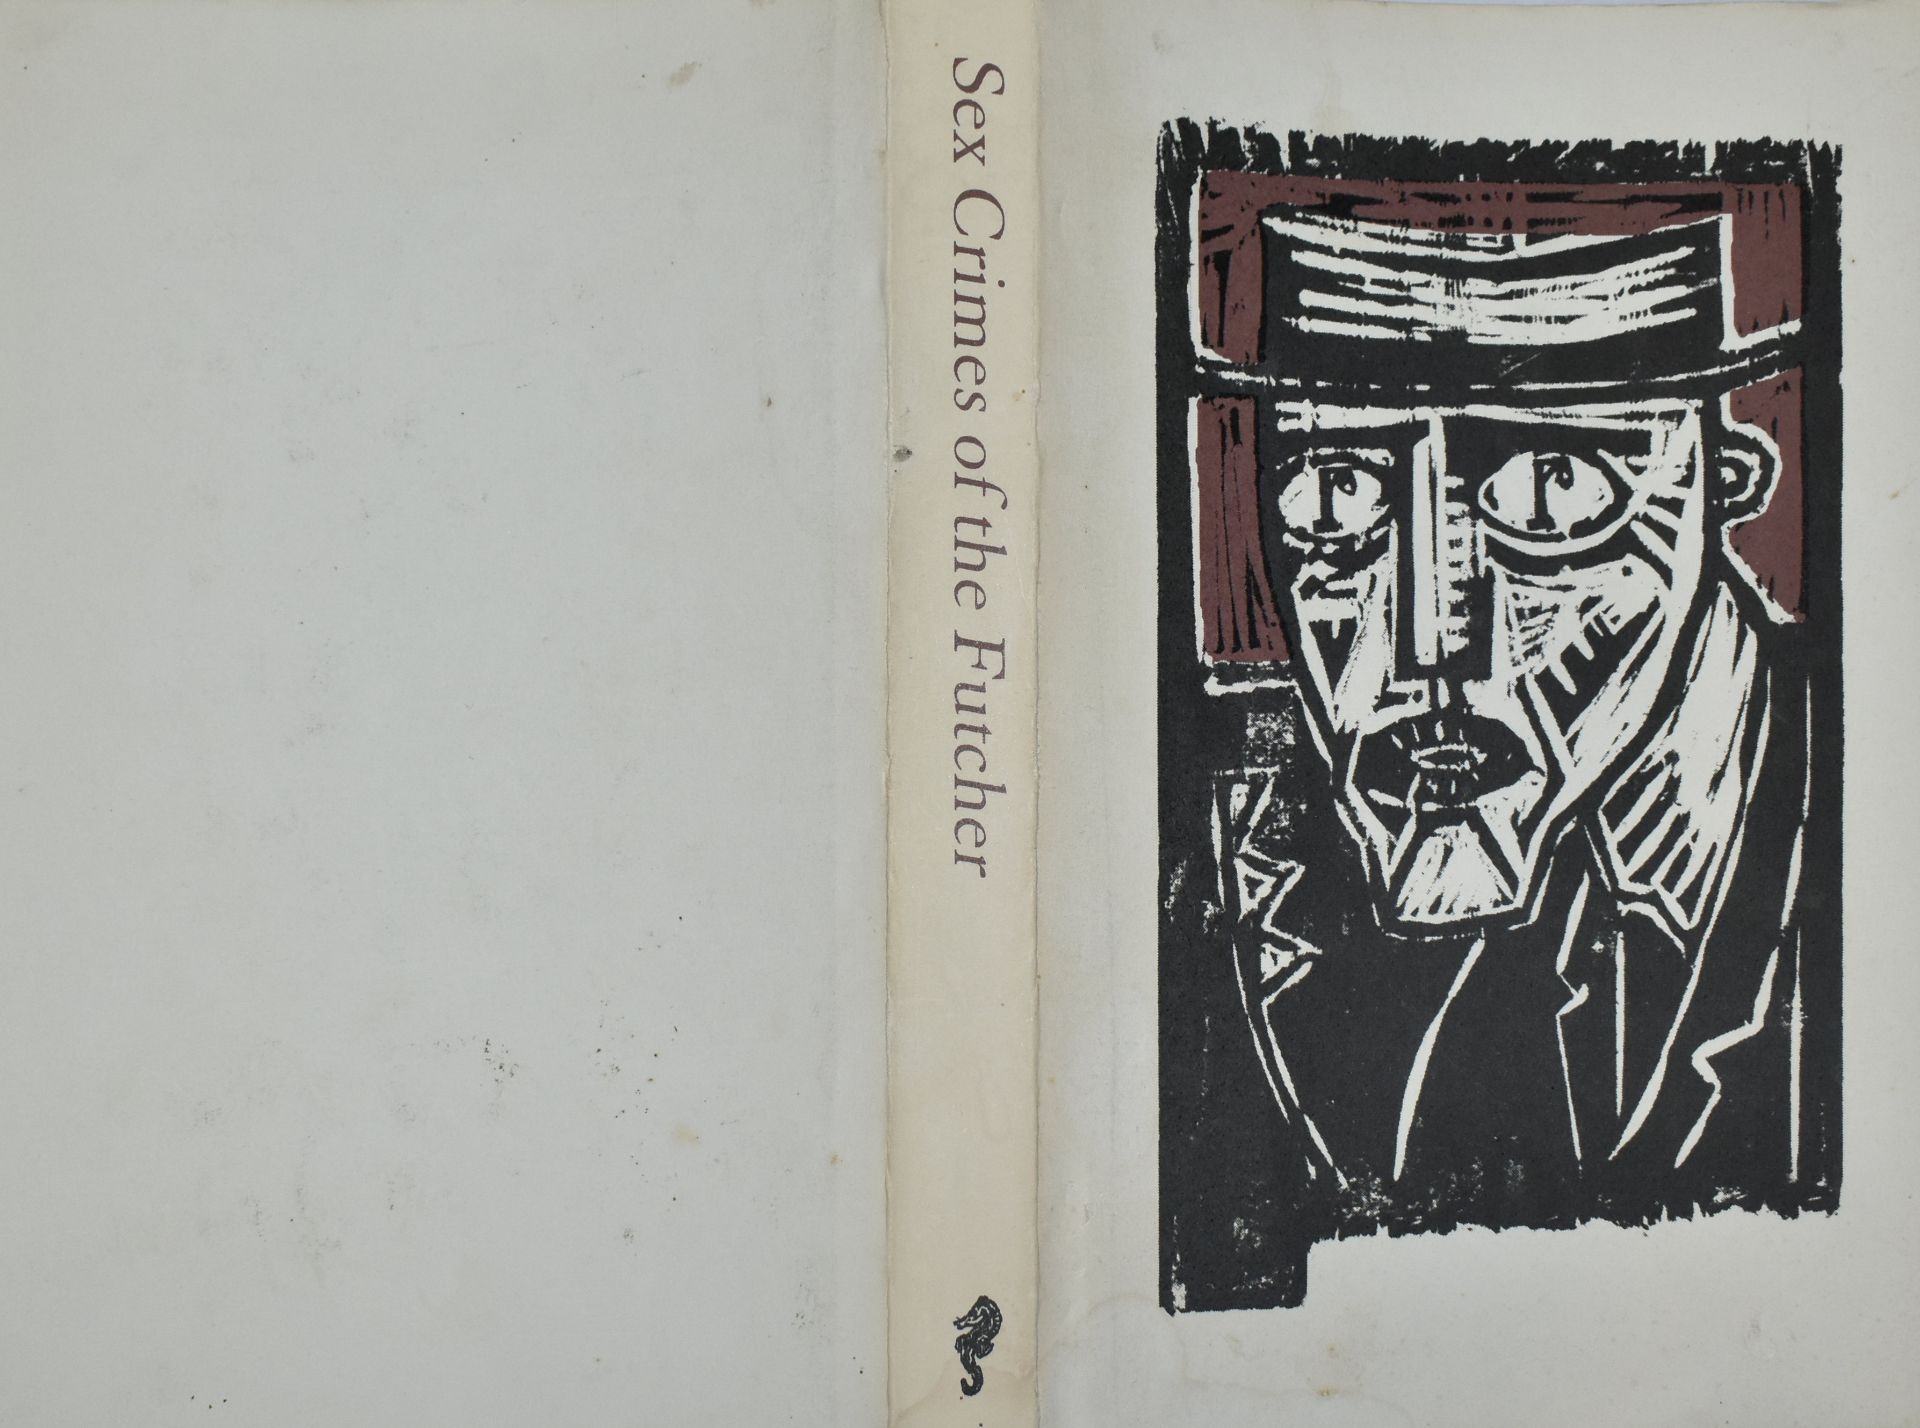 SEX CRIMES OF THE FUTCHER - SIGNED BY BILLY CHILDISH - Image 6 of 6